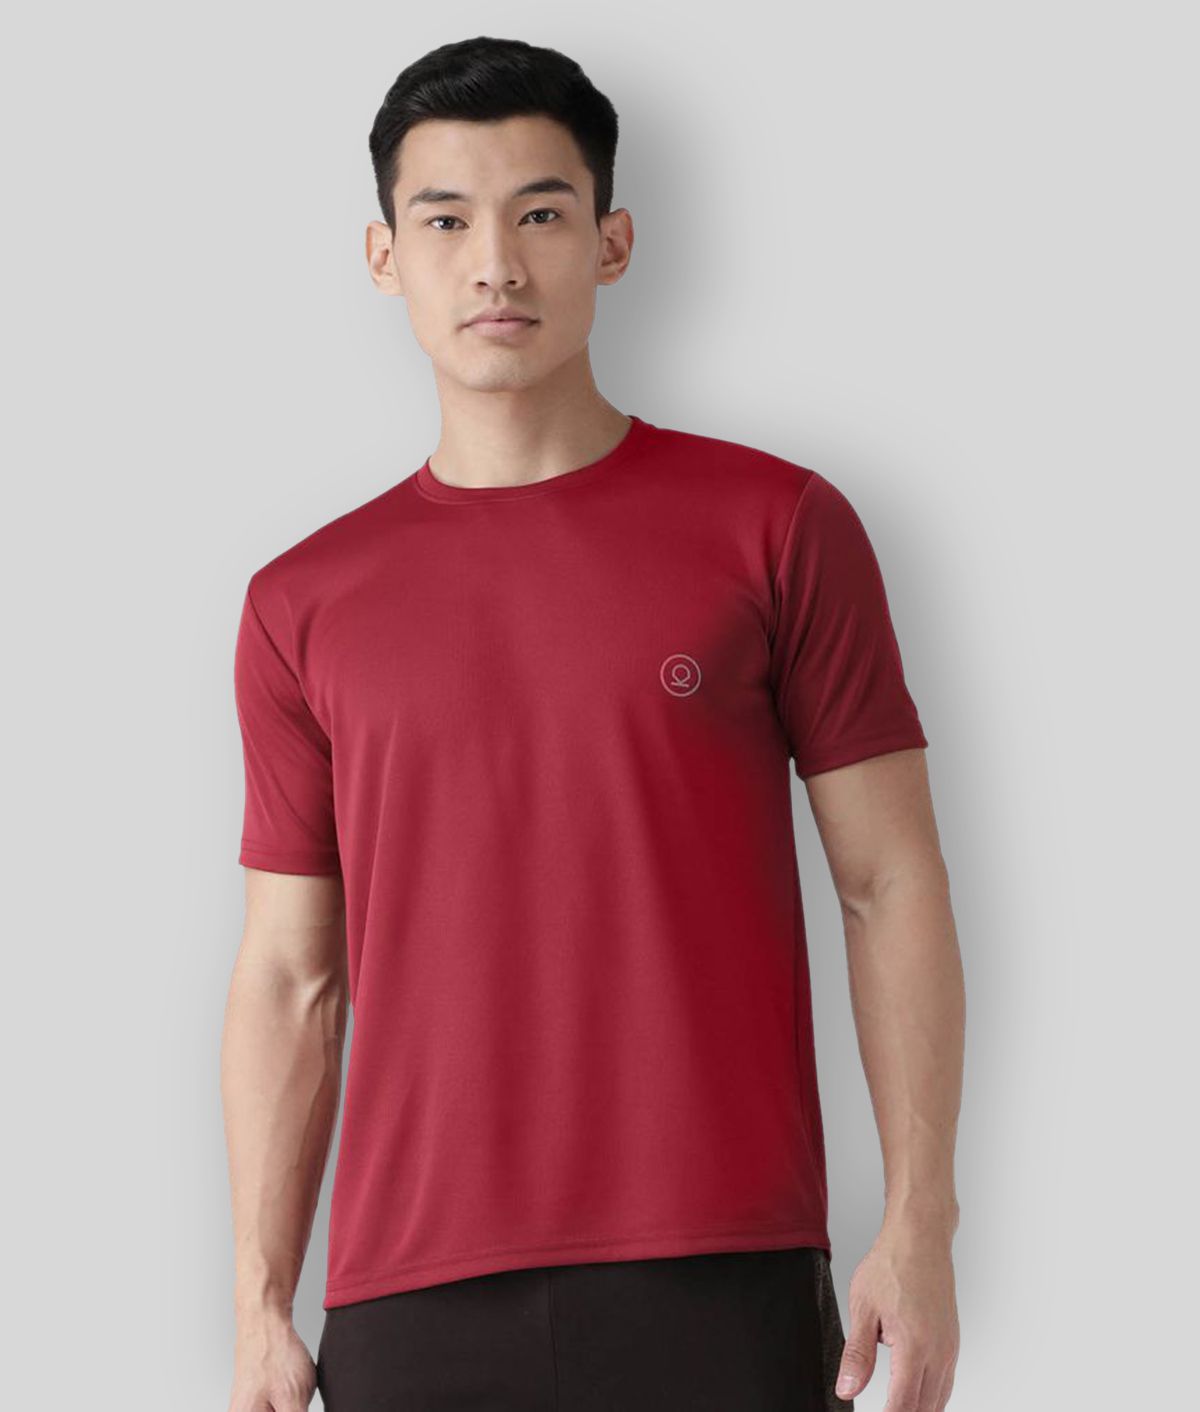     			Chkokko - Polyester Regular Fit Maroon Men's Sports Polo T-Shirt ( Pack of 1 )